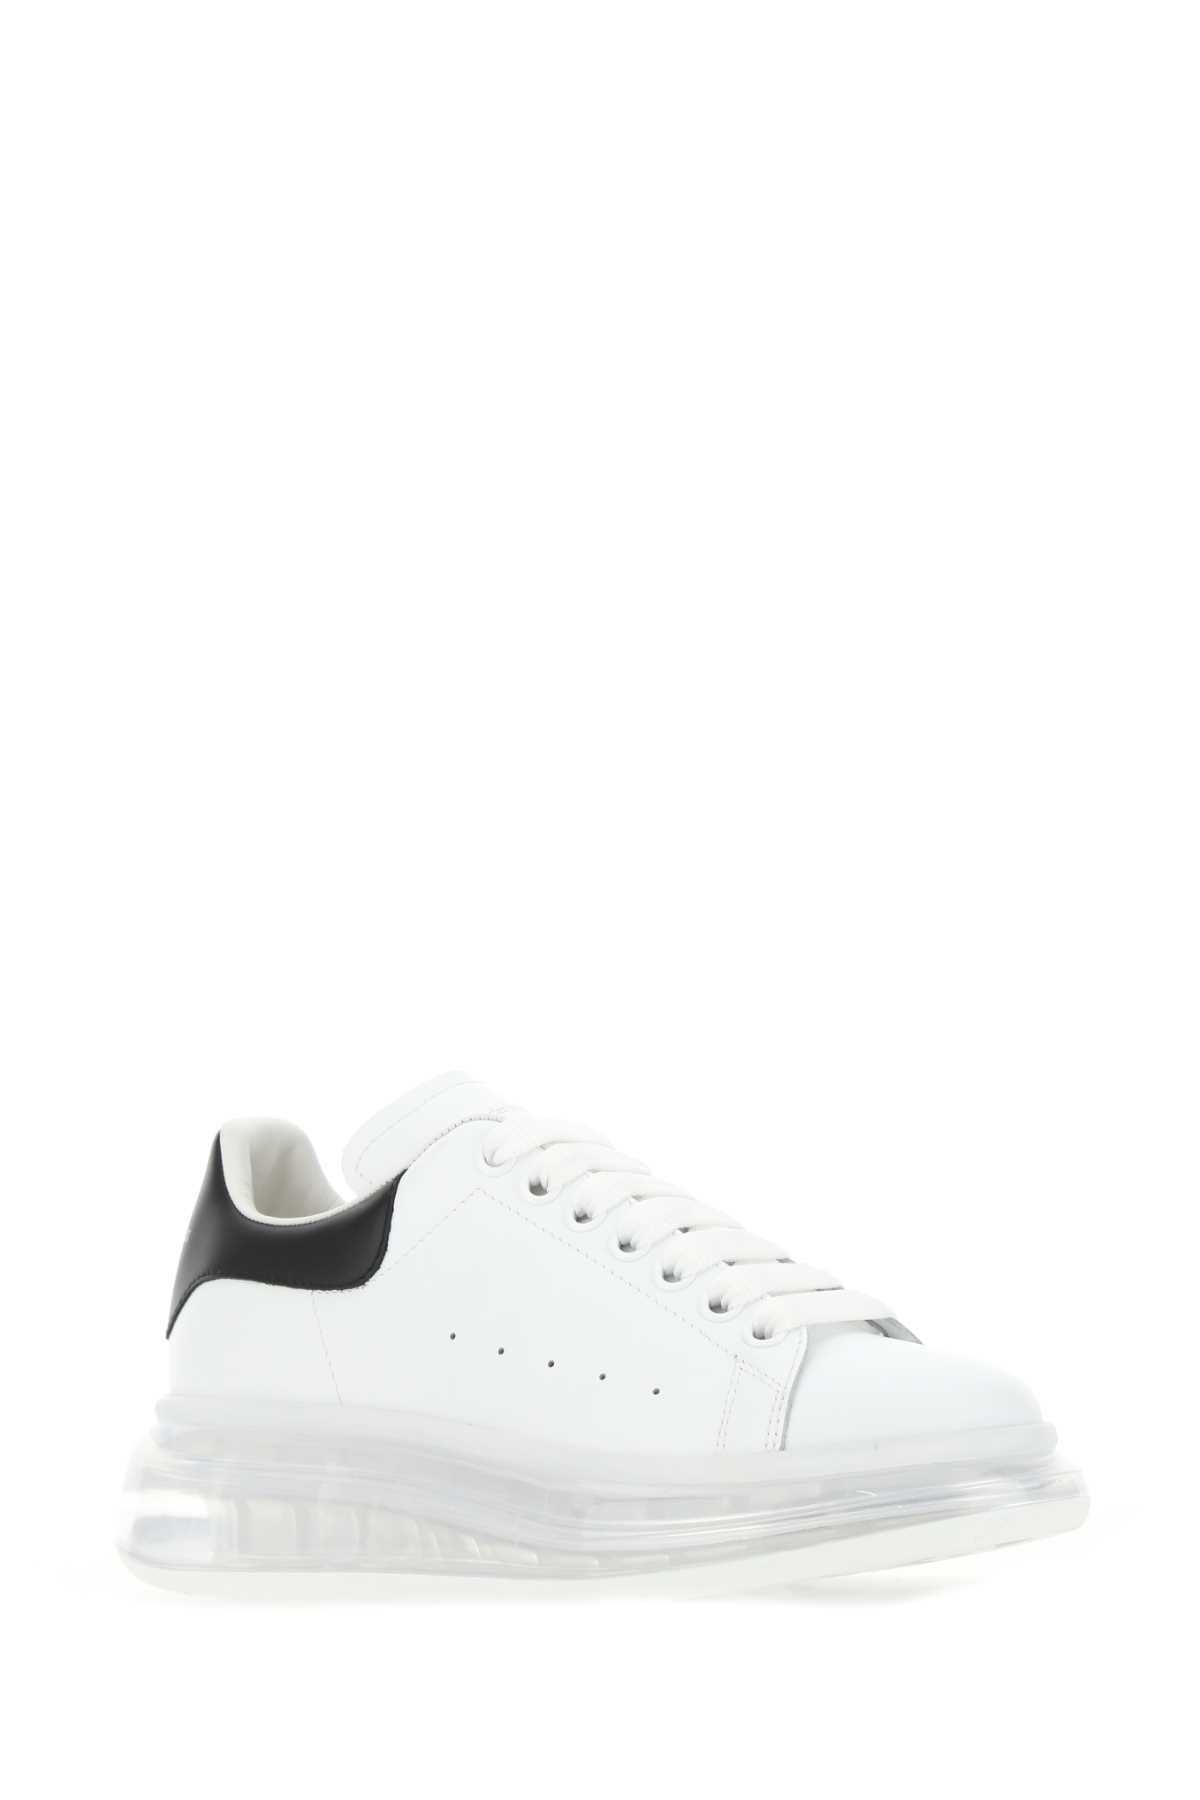 ALEXANDER MCQUEEN WHITE LEATHER SNEAKERS WITH BLACK LEATHER HEEL